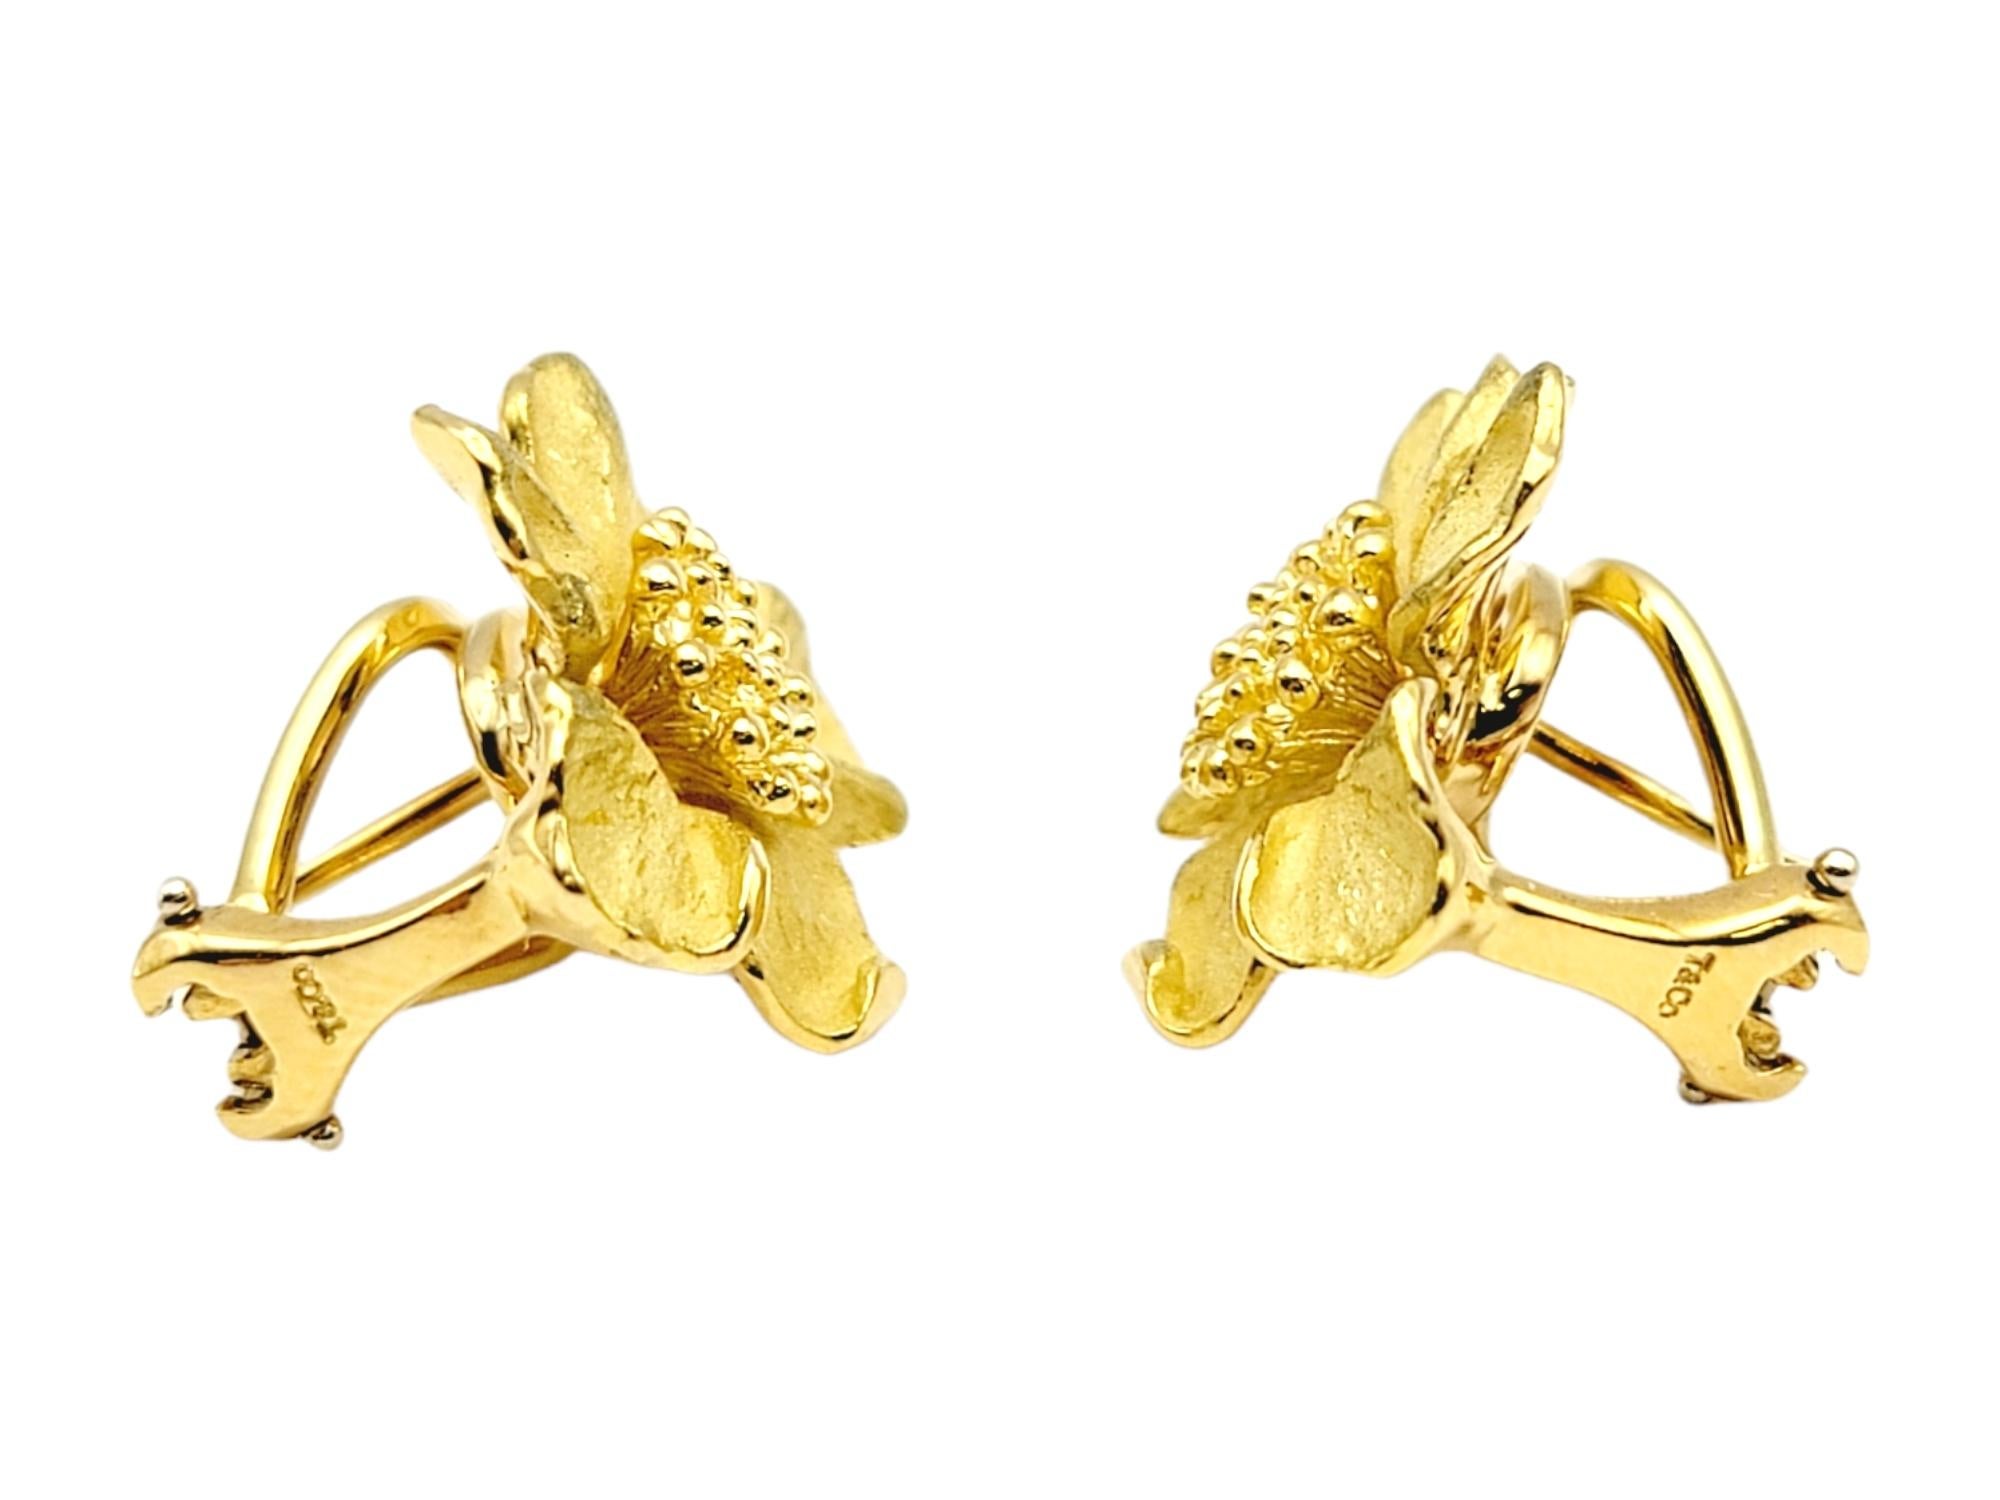 Stunningly detailed Tiffany & Co. dogwood flower earrings. Featuring a luxurious 18 karat yellow gold construction, the lifelike flowers are intricately carved and finished in an artful combination of brushed and polished gold. 

Metal: 18K Yellow